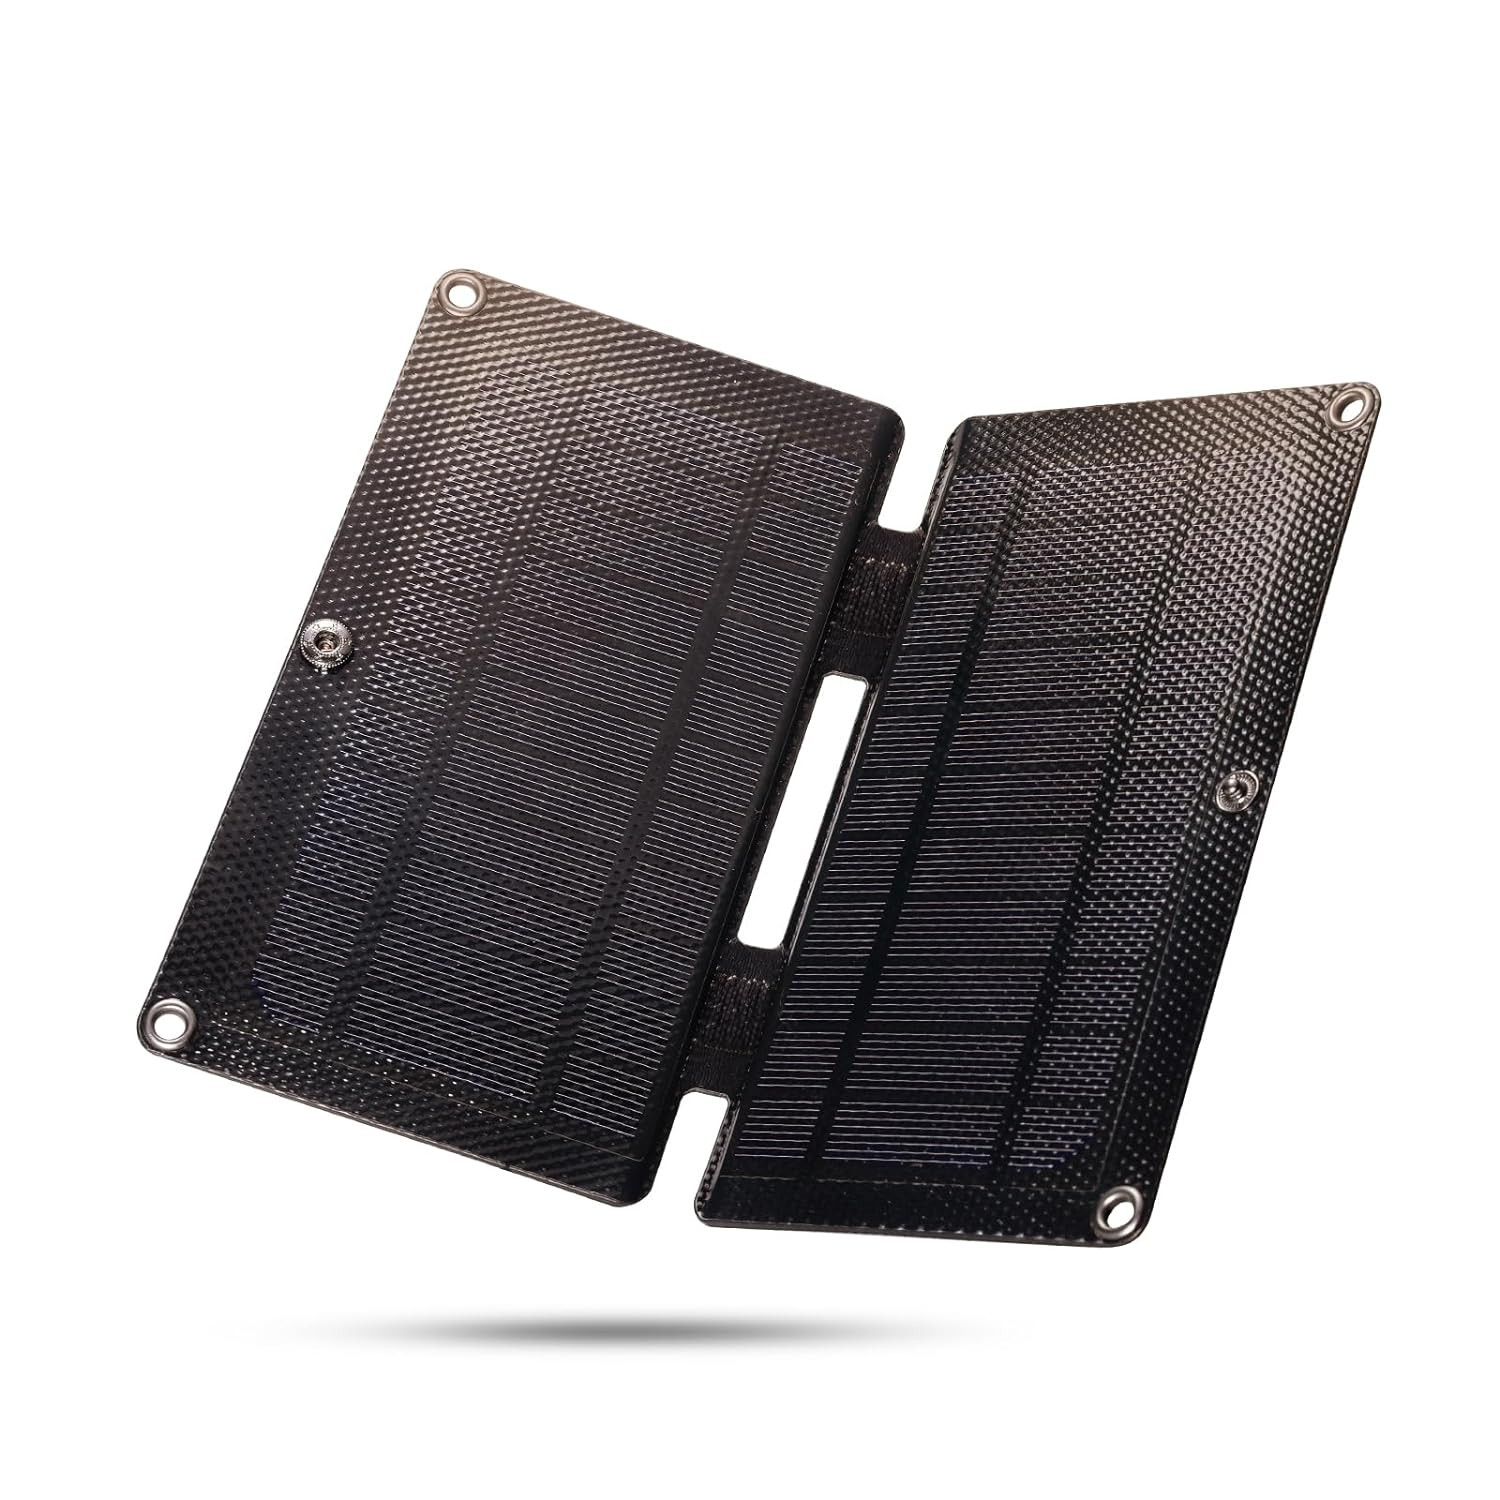 Raddy SP4 4W Portable Solar Panel, 5V 0.8A Foldable Solar Panels Emergency Kit for Outdoor, Compatible with All Weather Radios SW10 SH-905 SW5 SL10